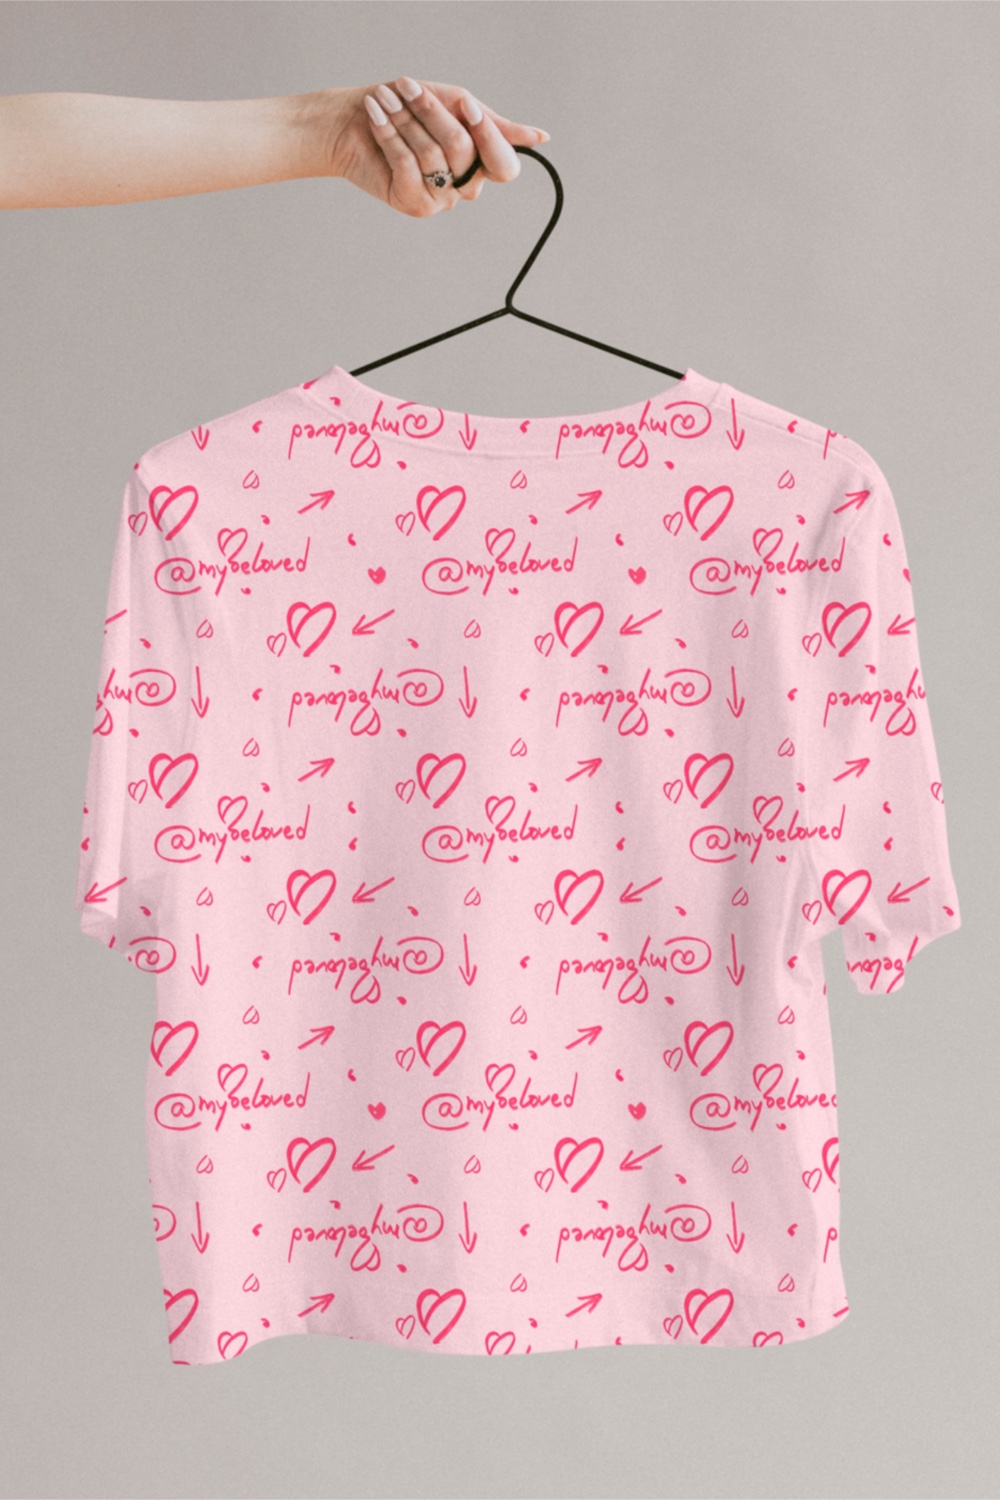 Seamless LOVE Patterns for Valentine’s Day